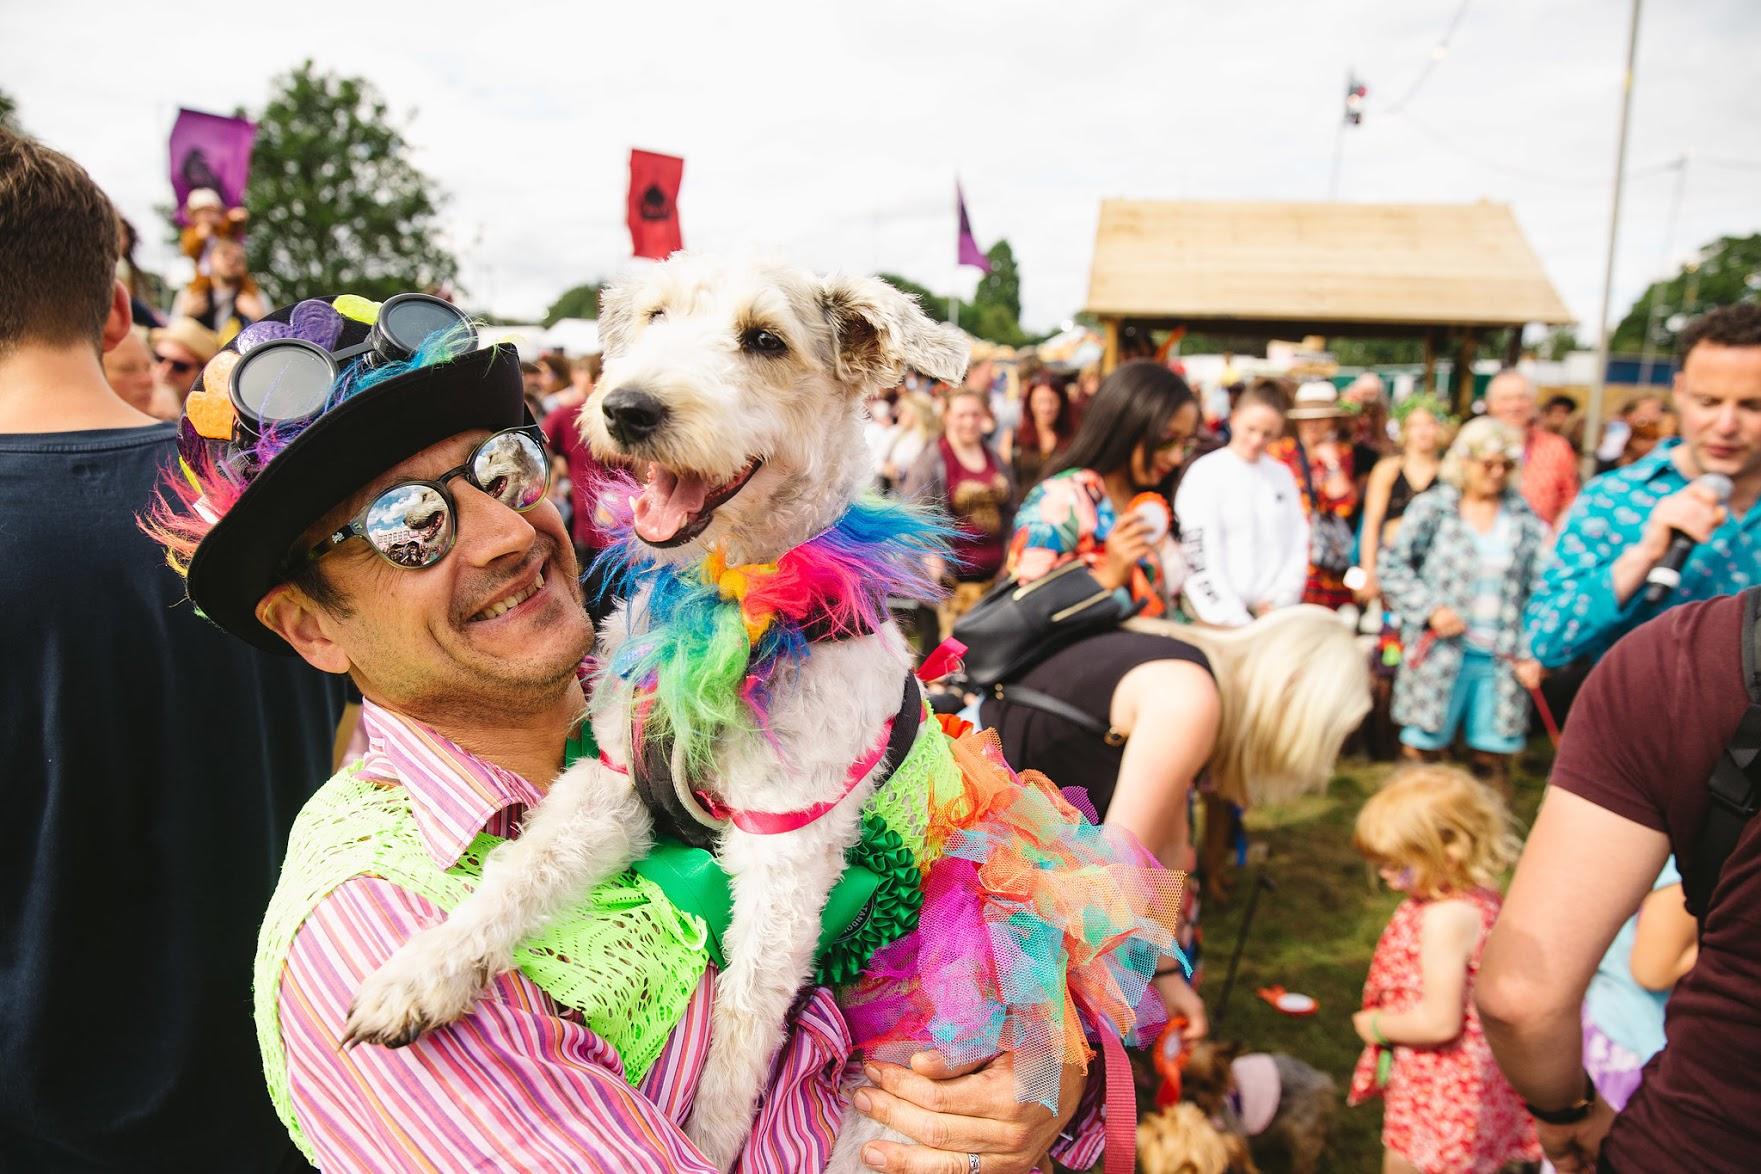 &#13;
A contestant at the dog show at Standon Calling &#13;